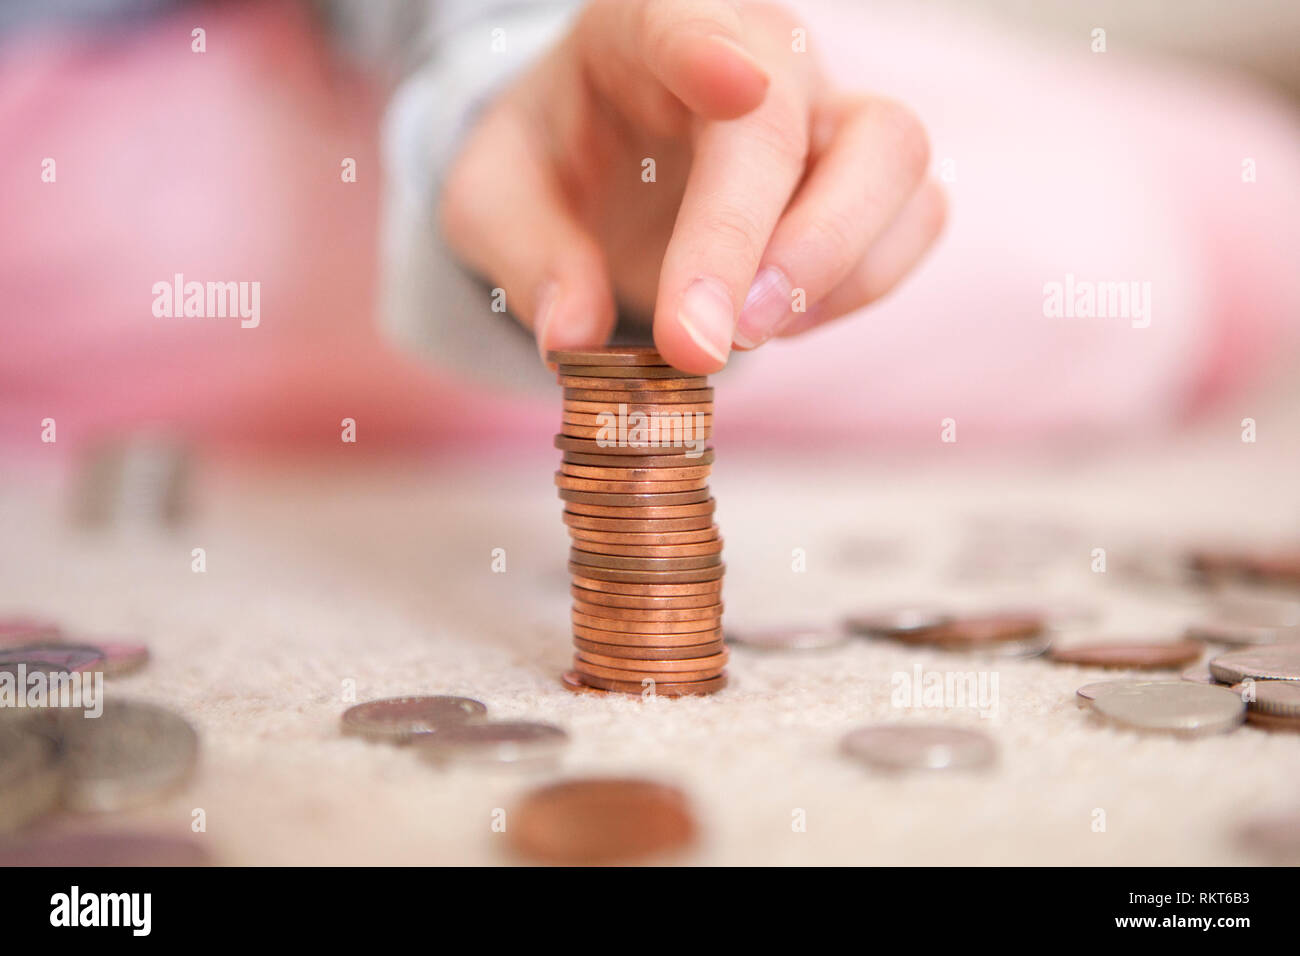 Child stacking coins of pocket money Stock Photo